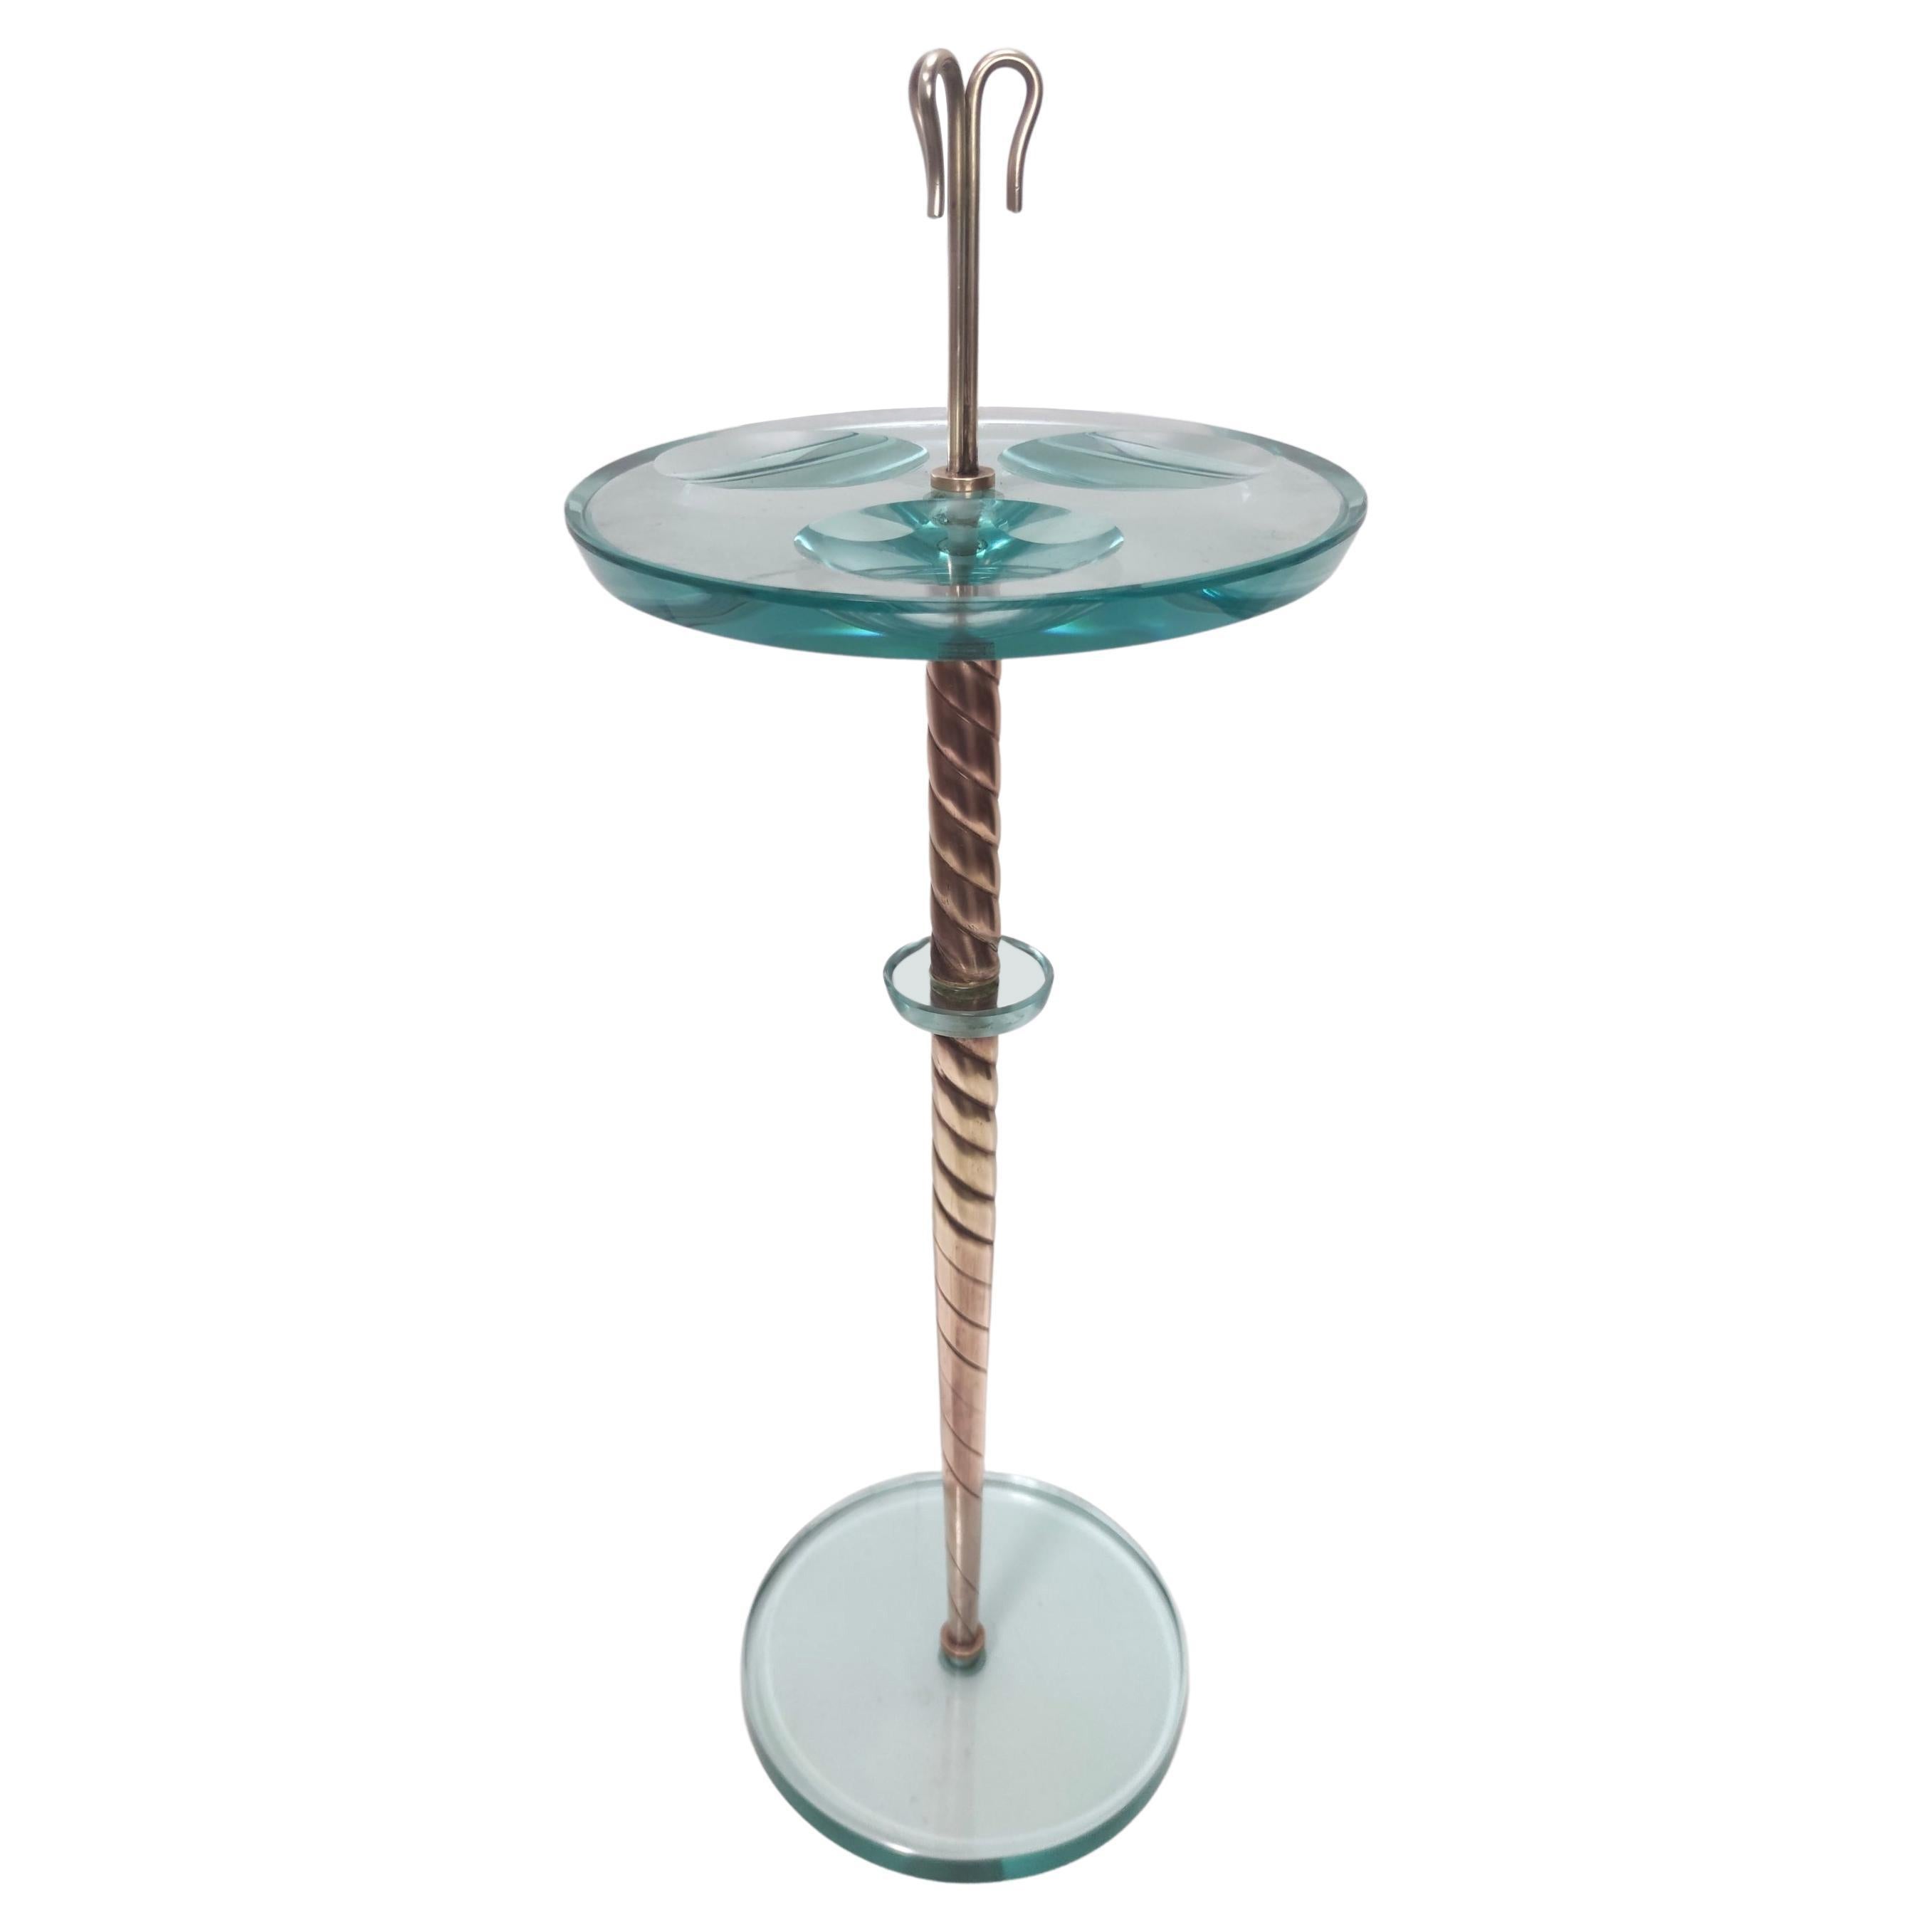 Vintage Beveled Glass and Brass Ashtray Stand Ascribable to Fontana Arte, Italy